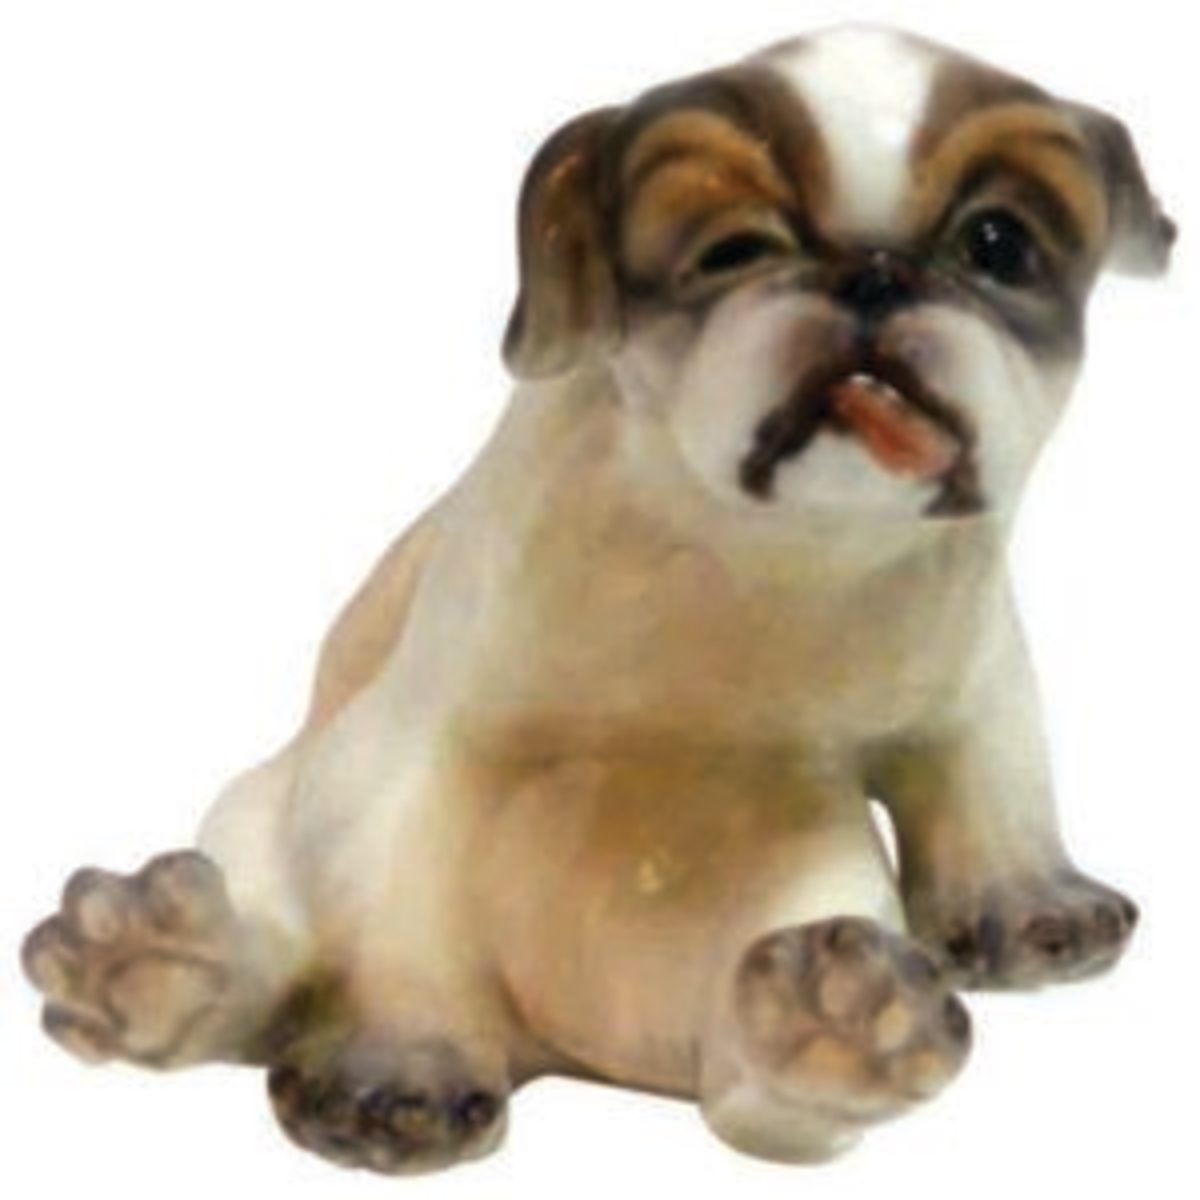  This adorable and chubby little porcelain Pekingese puppy is one of O’Connor’s favorite pieces. It was designed by Dahl-Jensen between 1928 and the early 1930s. Image courtesy of A Dog’s Tale Collectibles